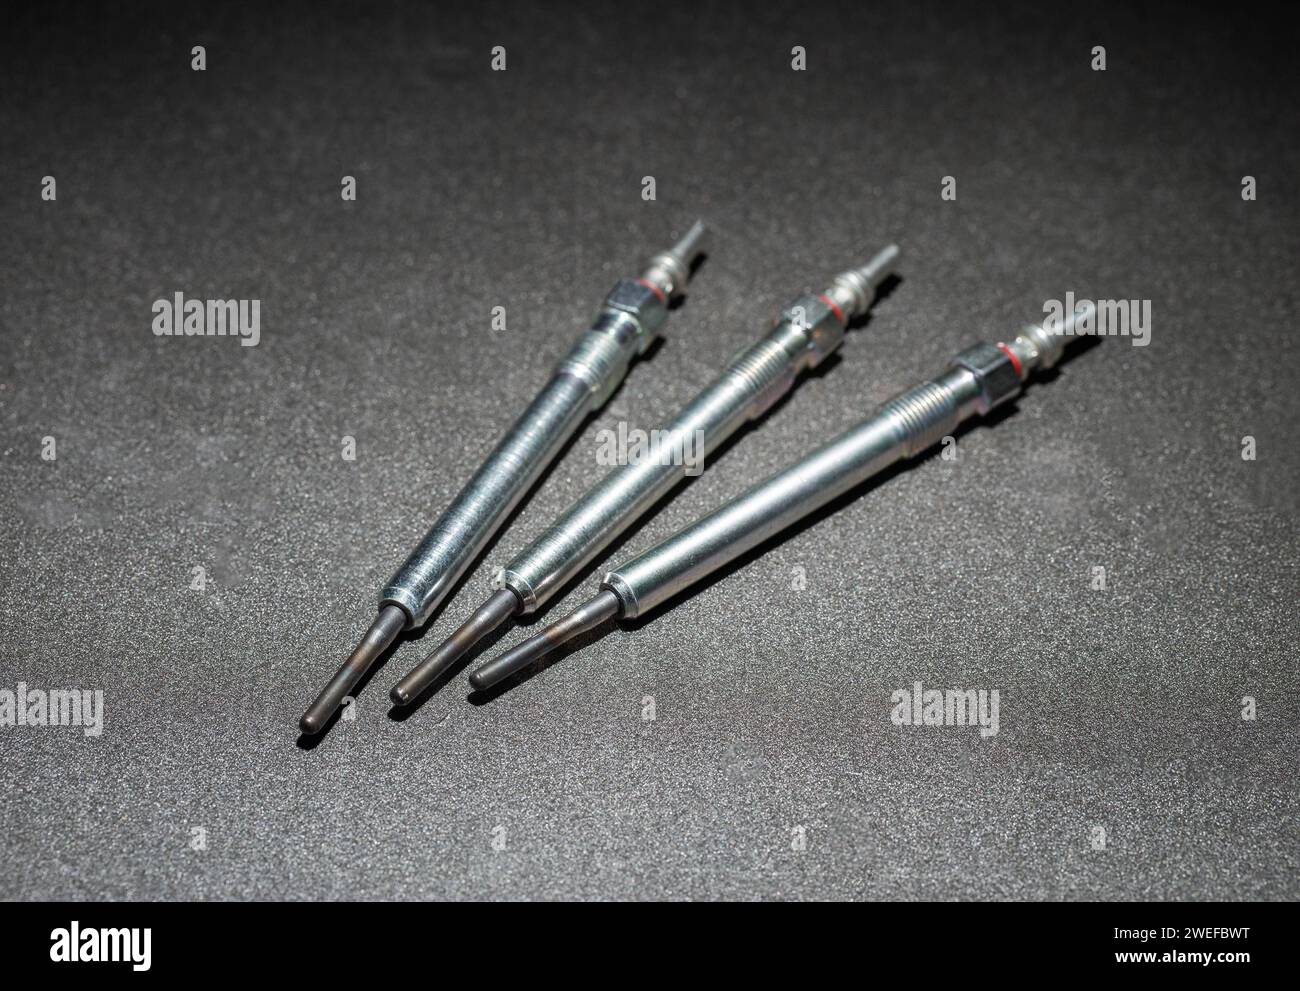 Modern rod ceramic glow plugs for easier starting of a diesel engine in cold weather on a gray background. Automotive spare part, heating element, eng Stock Photo